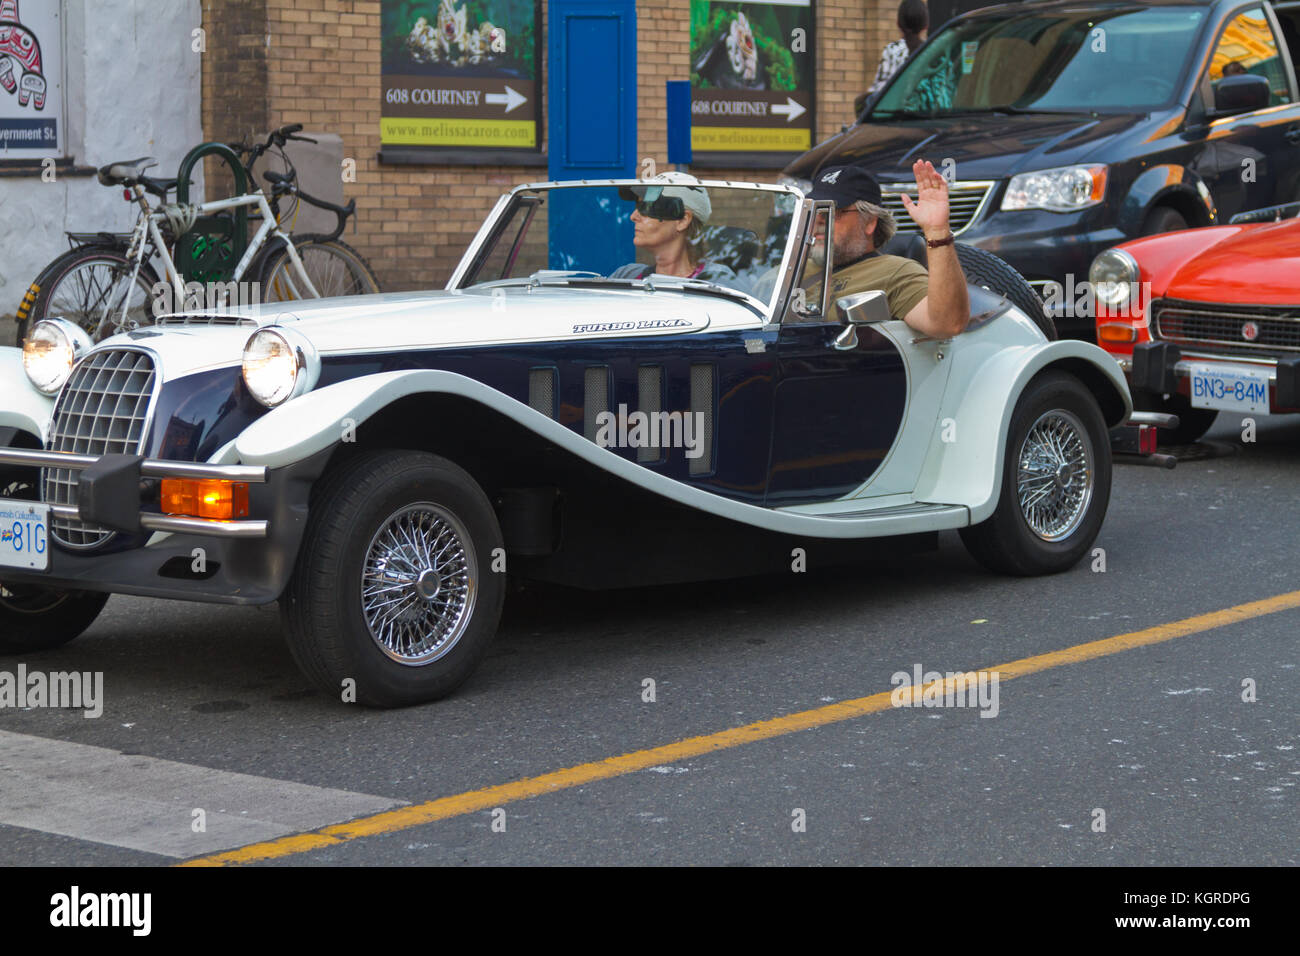 A classic Turbo Lima sports car seen on the streets of Victoria, British Columbia, Canada. Stock Photo